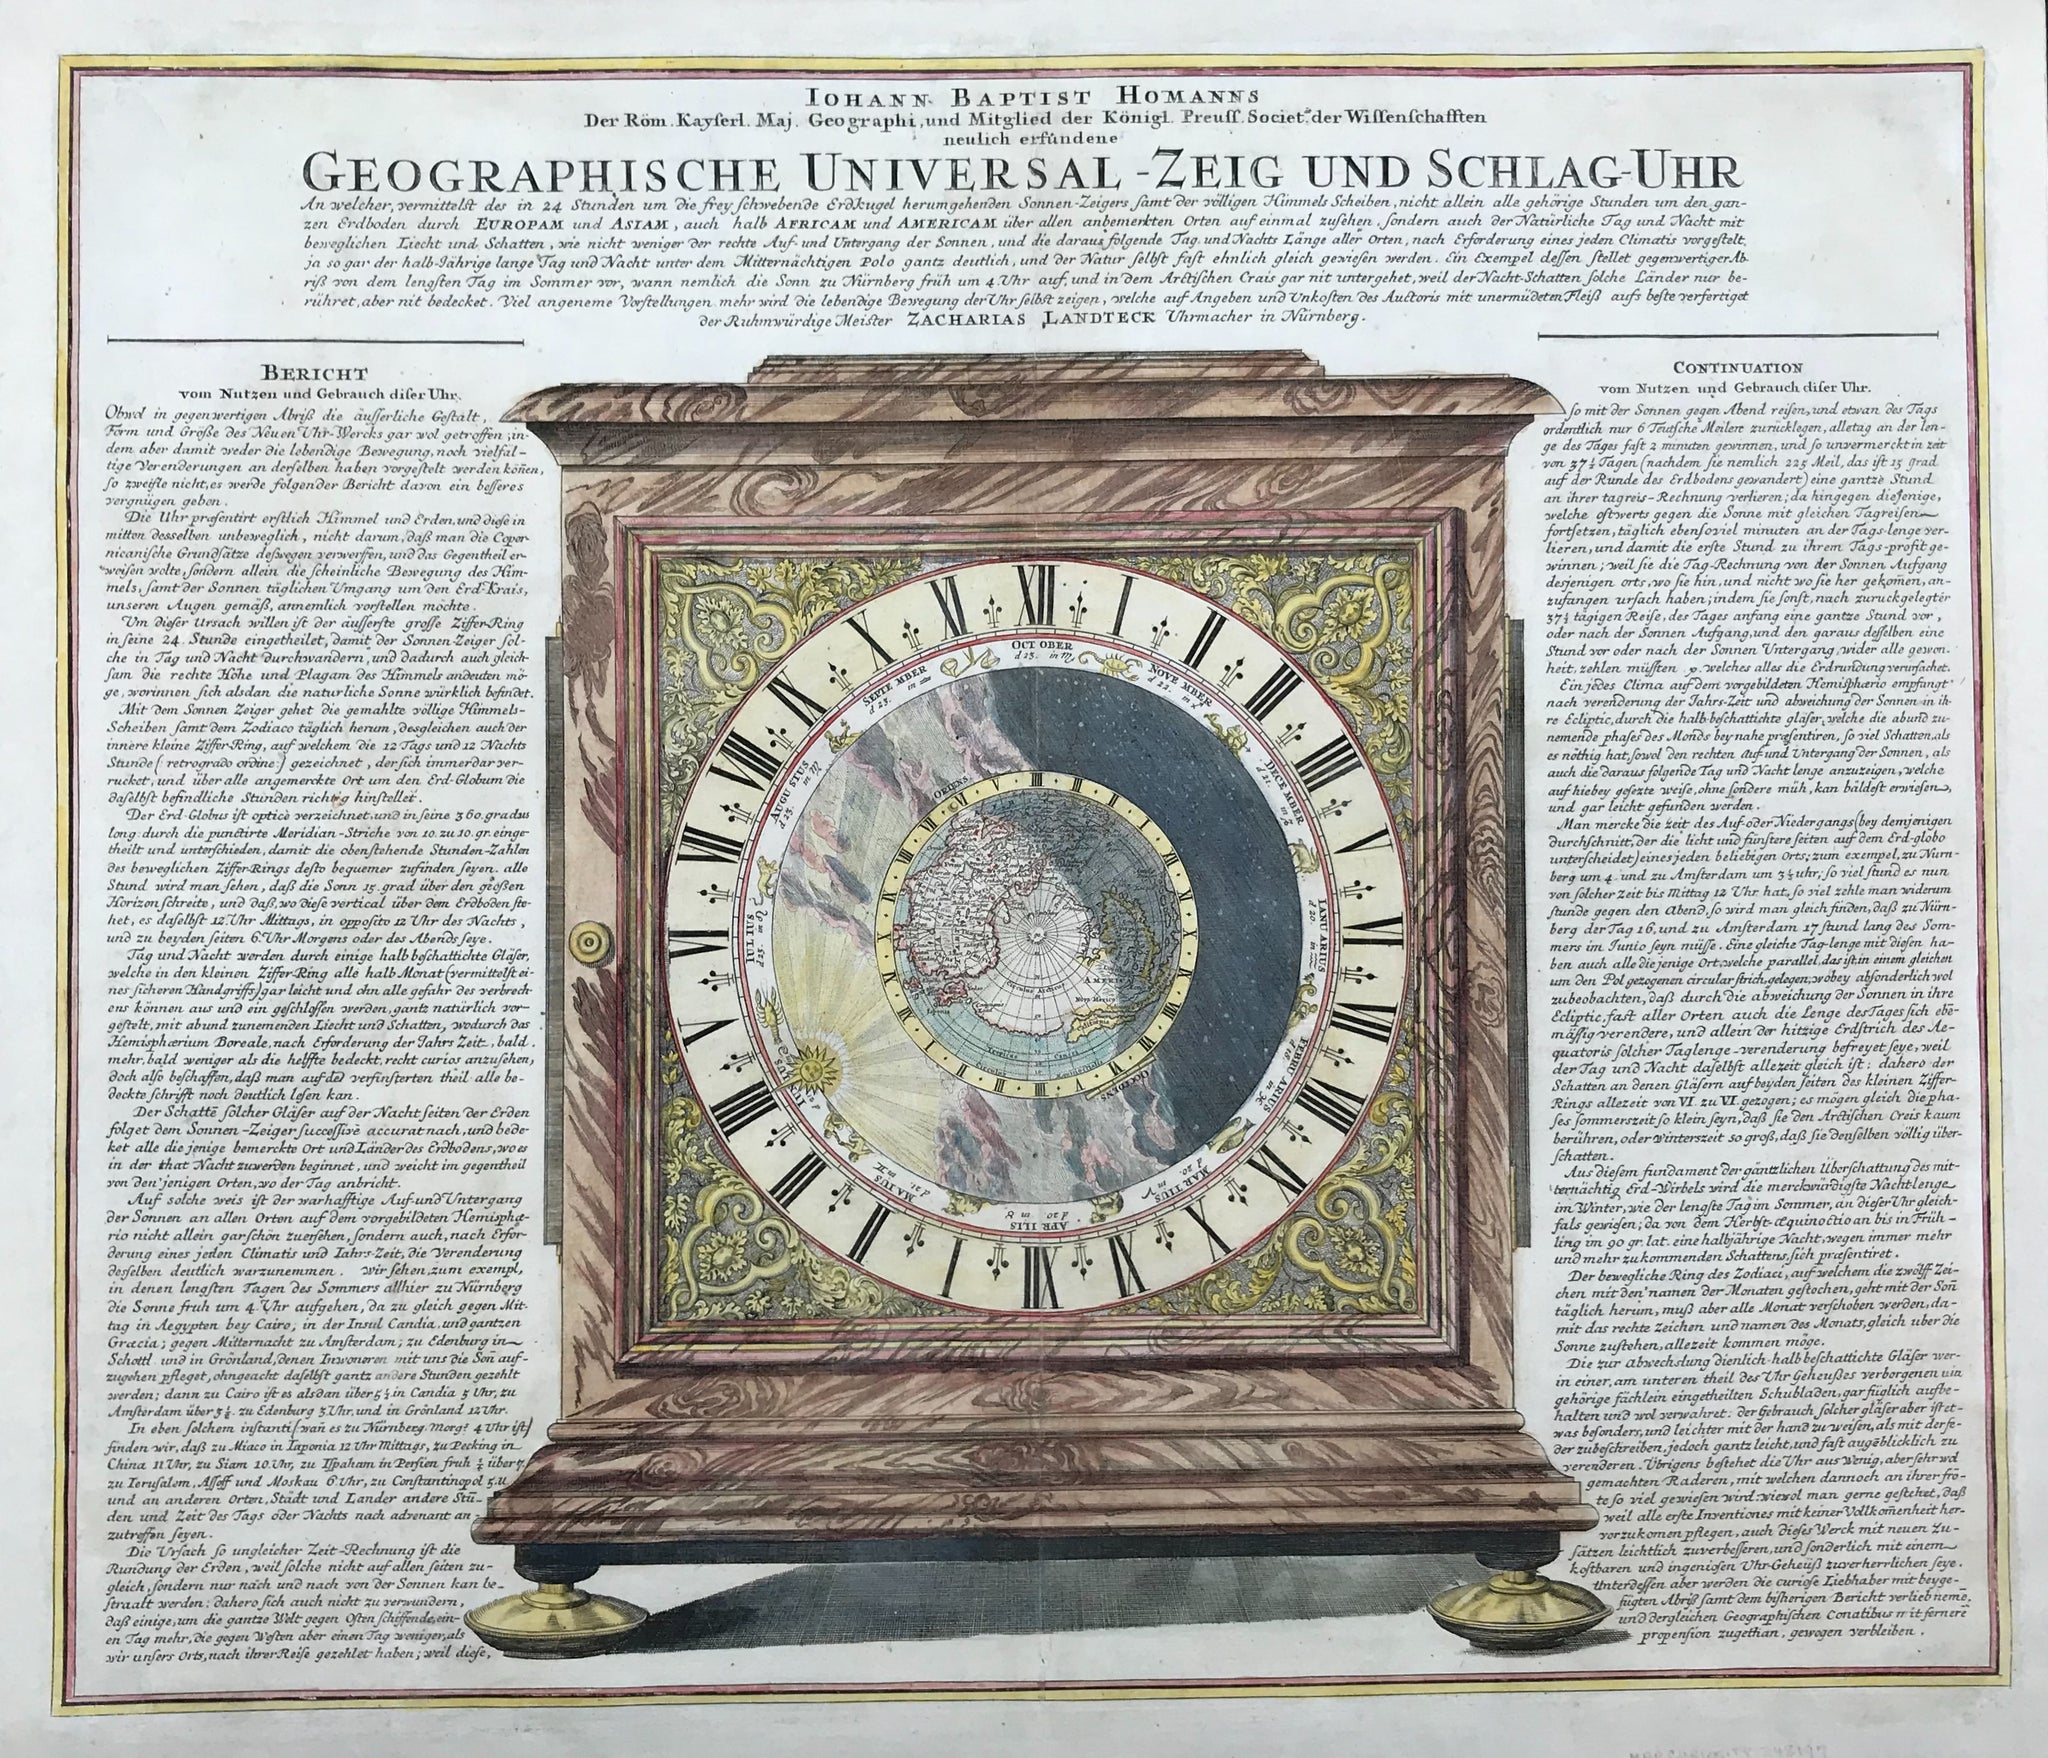 "Geographische Universal - Zeig und Schlag-Uhr"  Copper etching. Original hand coloring. Published by Johann Baptist Homann in Nuremberg.Ca. 1730/40.  Astronomical clock showing the northern hemisphere in day and night during the course of sun and earth for 24 hours. The legend left and right of clock explains the astronomical connections. It is surrounded by the Zodiac symbols. For collectors: California is shown as an island.  The clock was built by famous Nuremberg clock maker Zacharias Land(t)eck